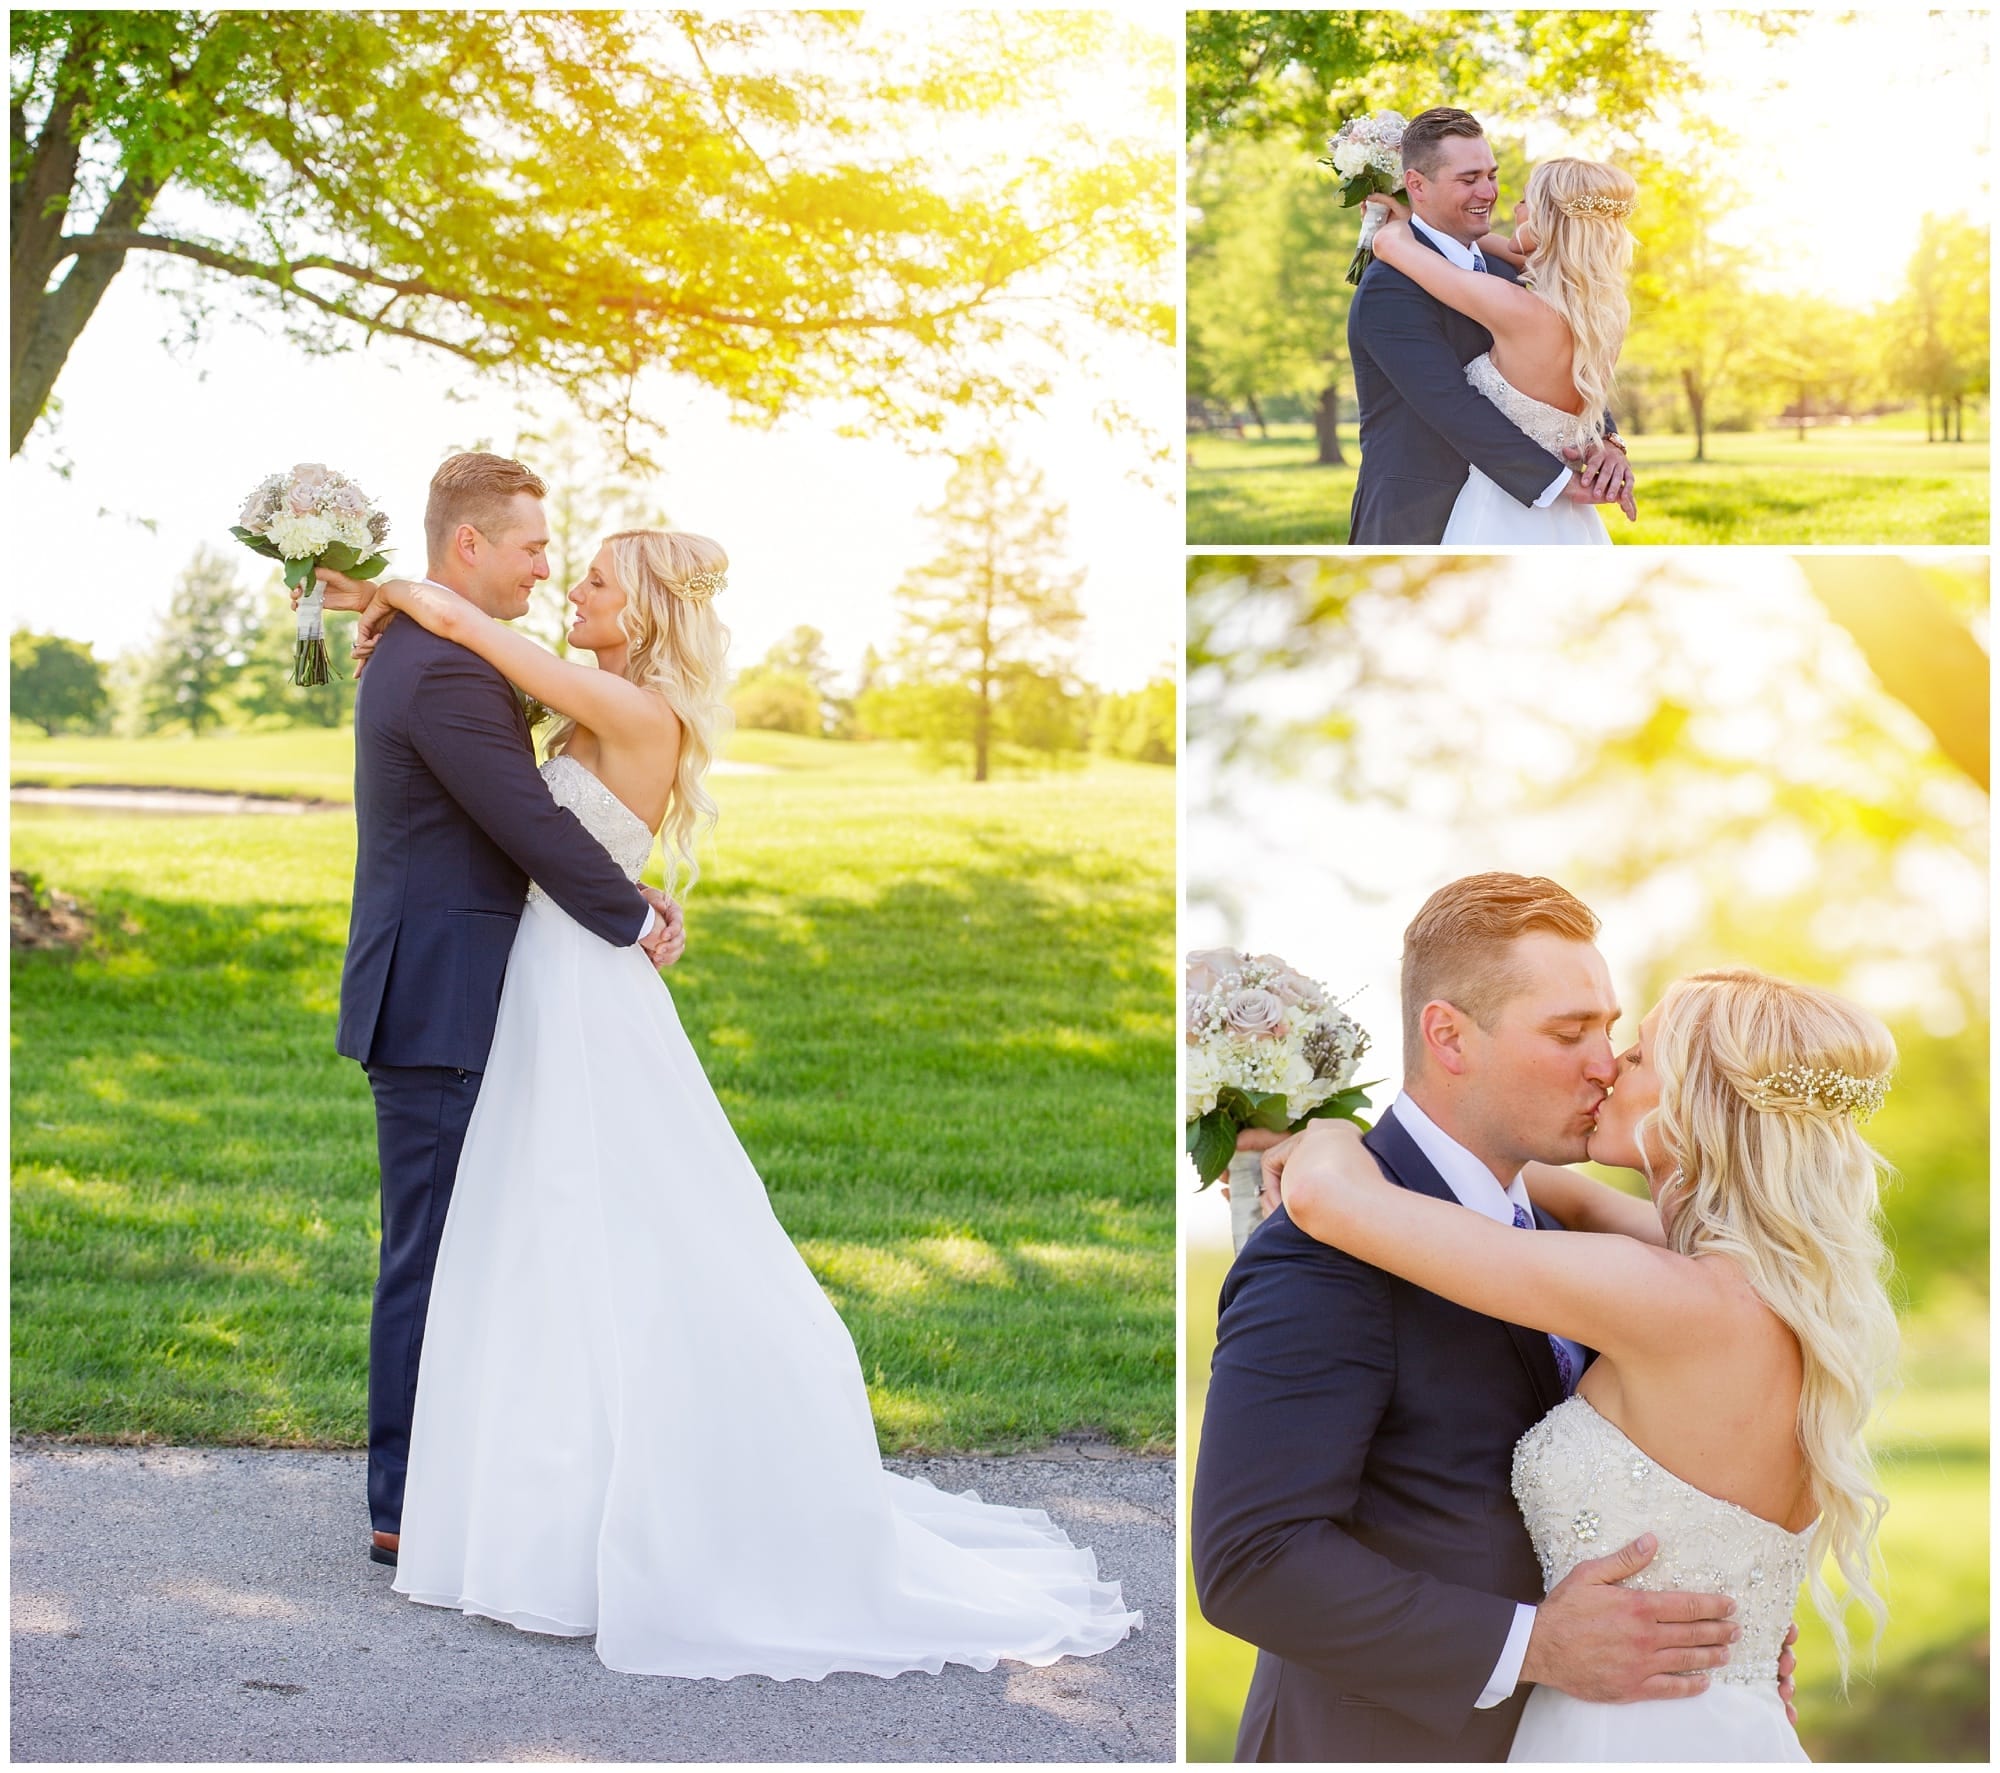 Odyessy_Country_Club_Tinley_Park_Wedding_Photographer_Laura_Meyer_Photography_2009